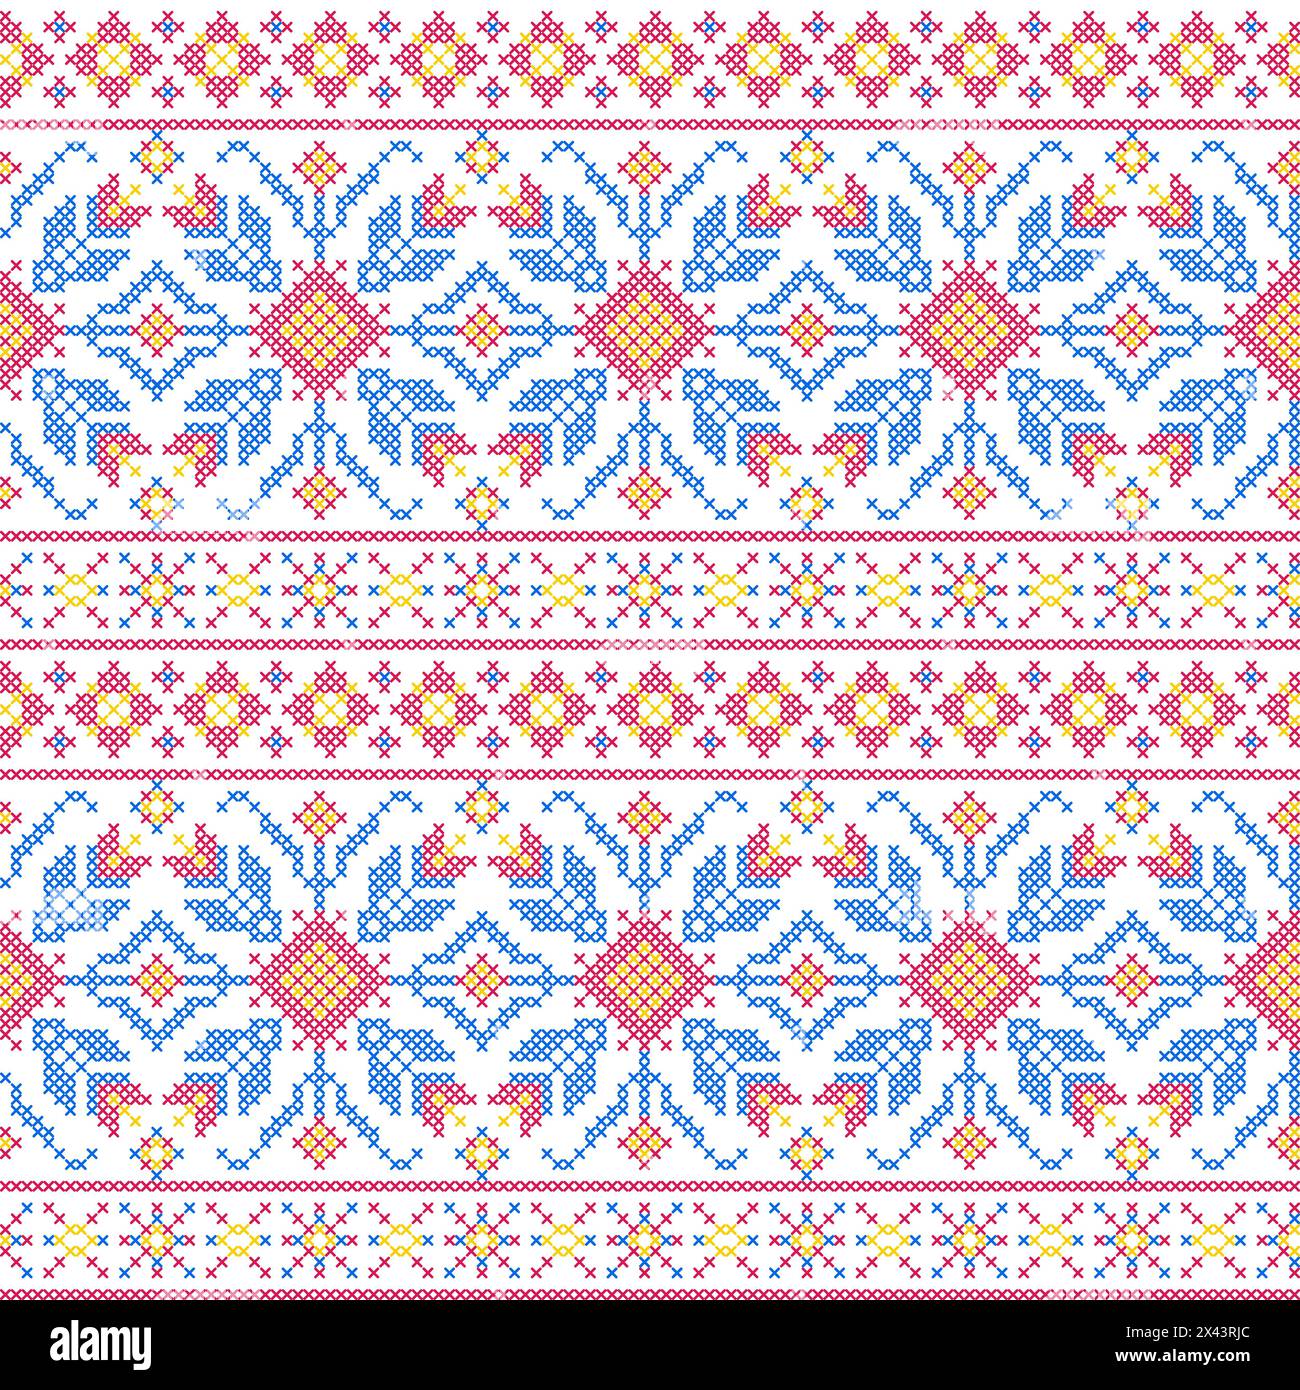 Seamless pattern in embroidery cross stitch style. Stock Vector